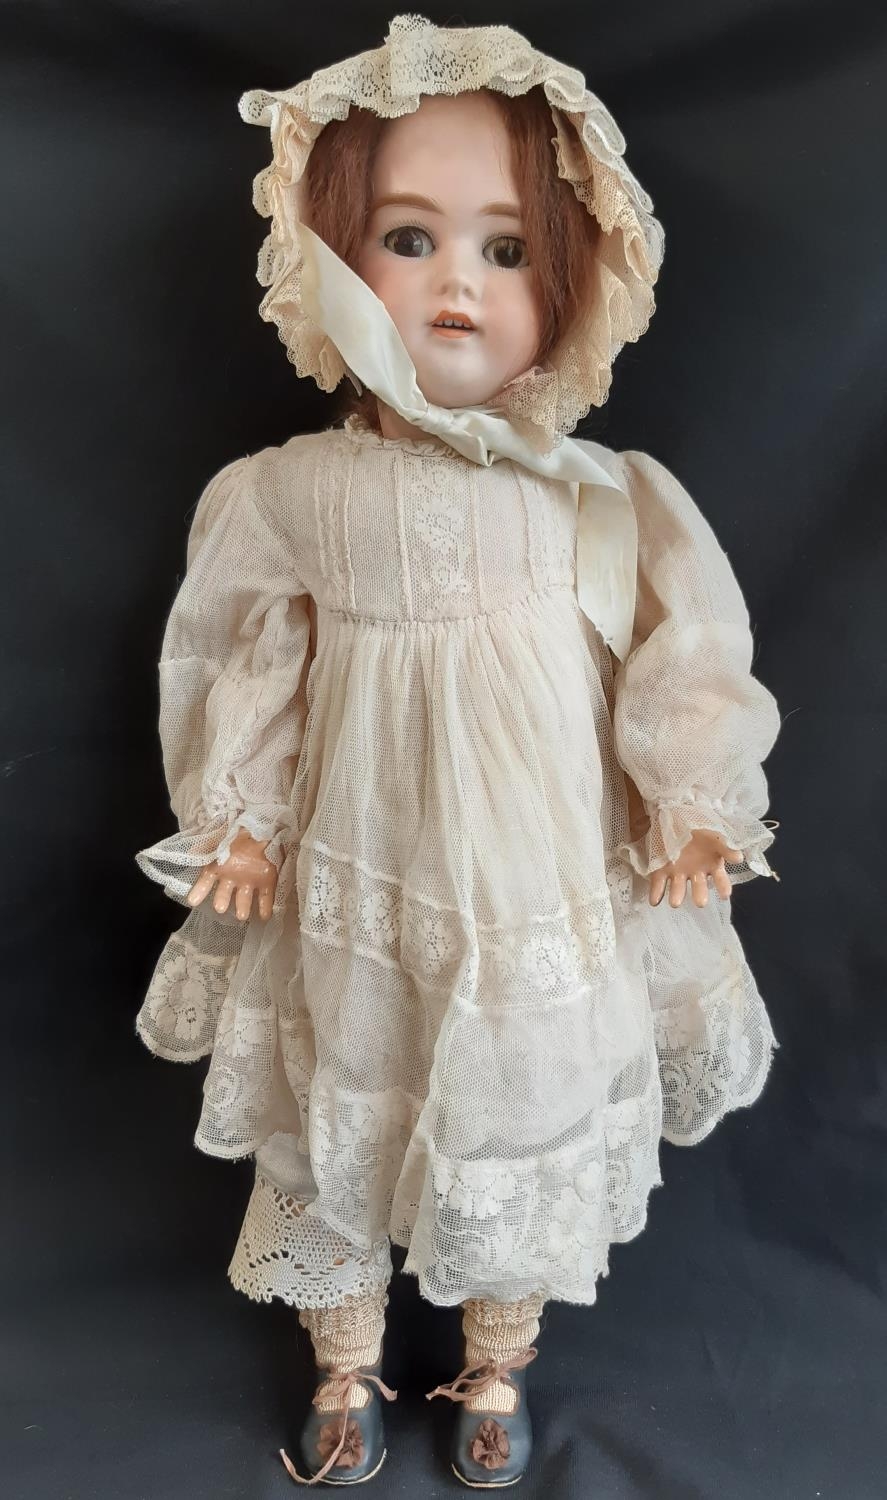 Early 20th century bisque head doll with jointed composition body, closing brown eyes, open mouth